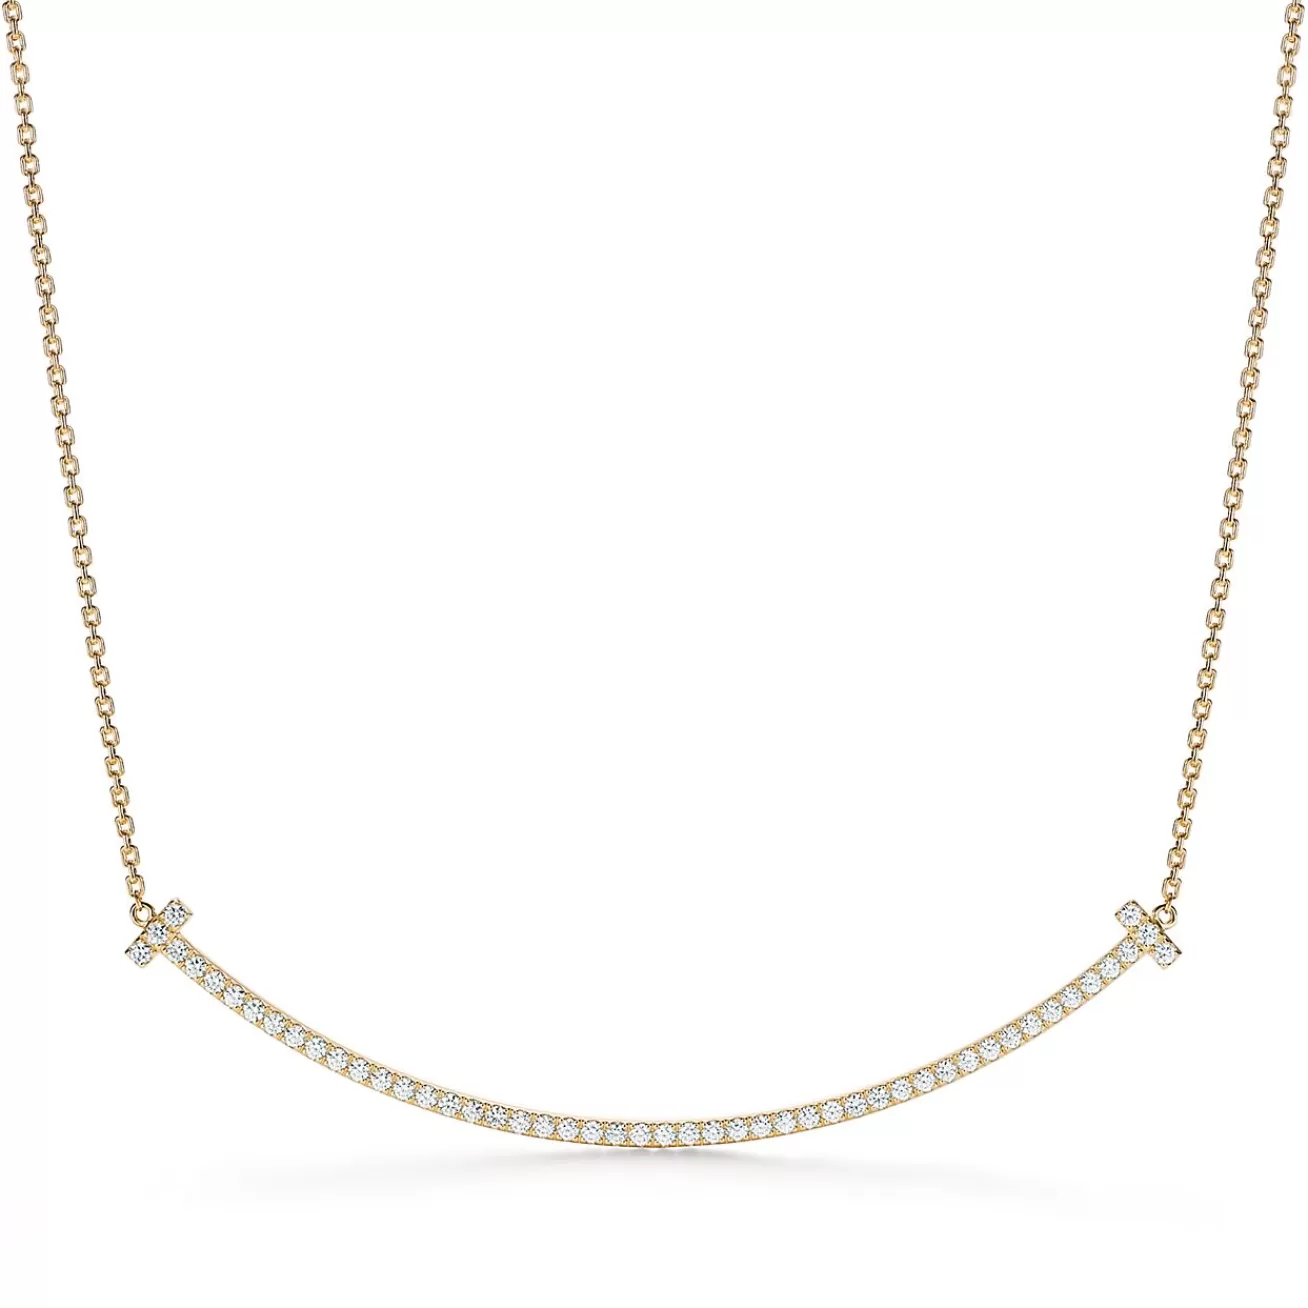 Tiffany & Co. Tiffany T extra large smile pendant in 18k gold with diamonds. | ^ Necklaces & Pendants | Men's Jewelry